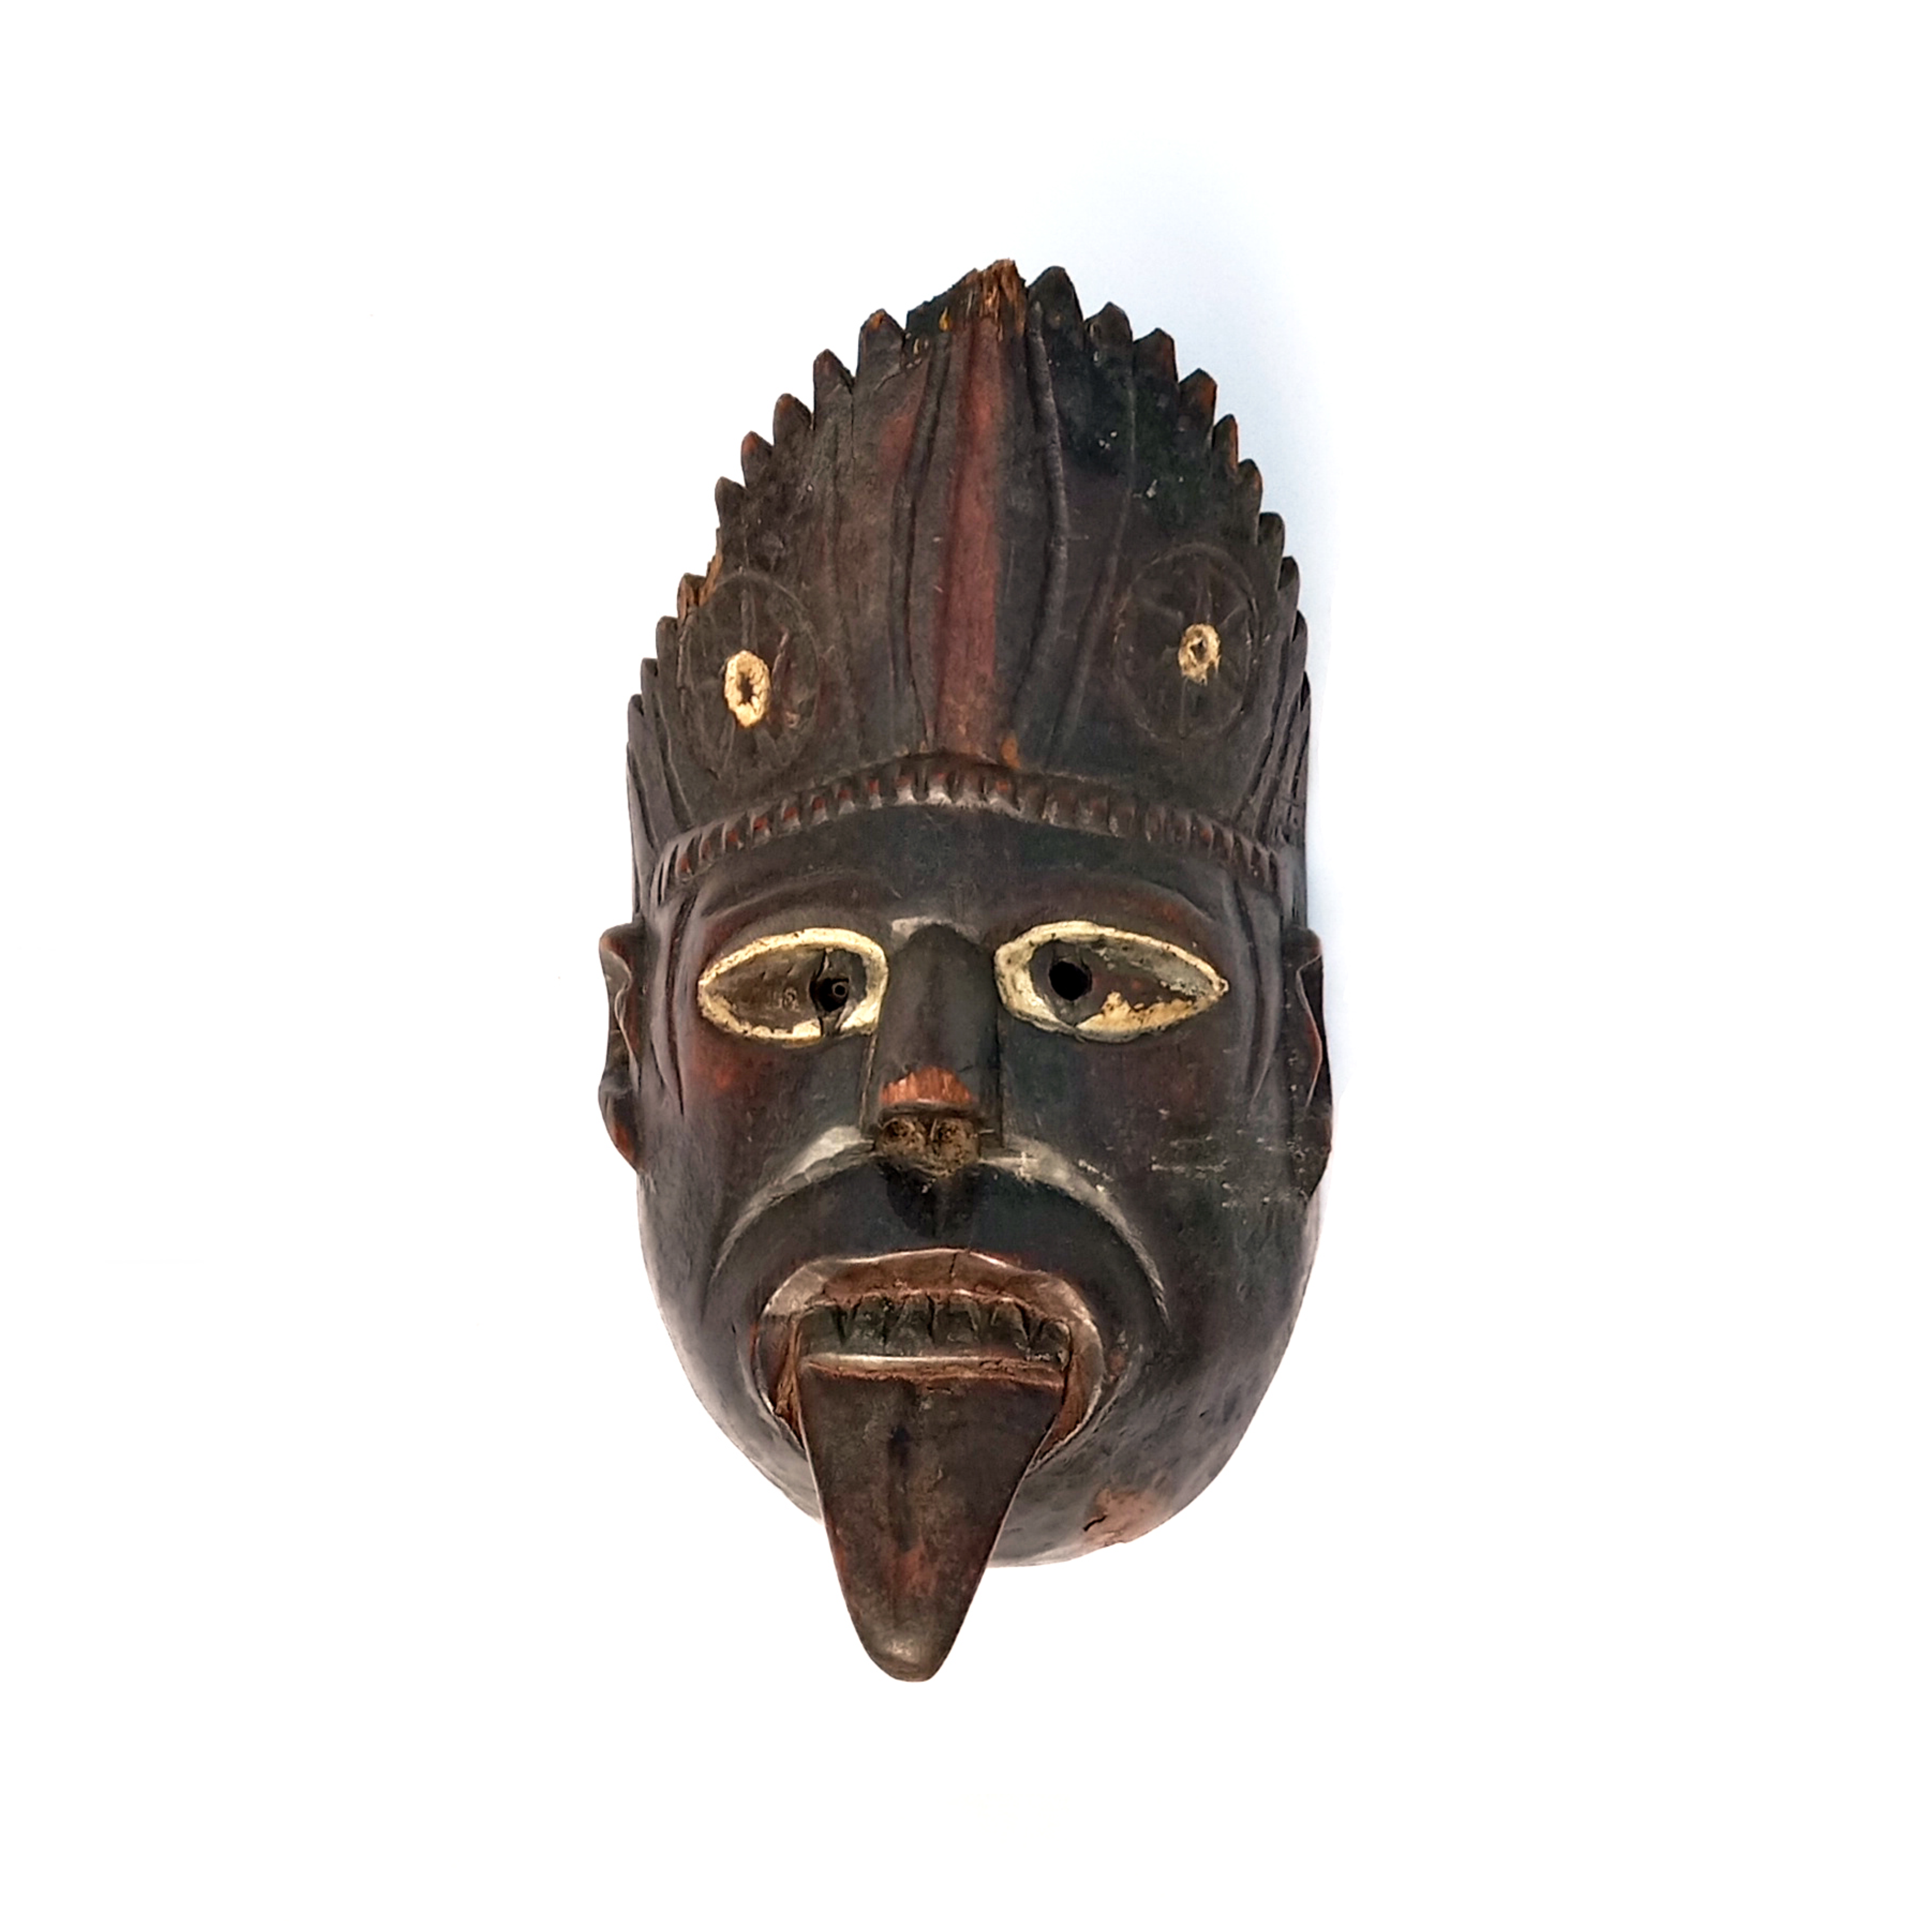 Handcrafted Art Craft Mask Cover Tribal Design hand Painted Craved Wood, wall decoration, wooden mask, ancient, heritage